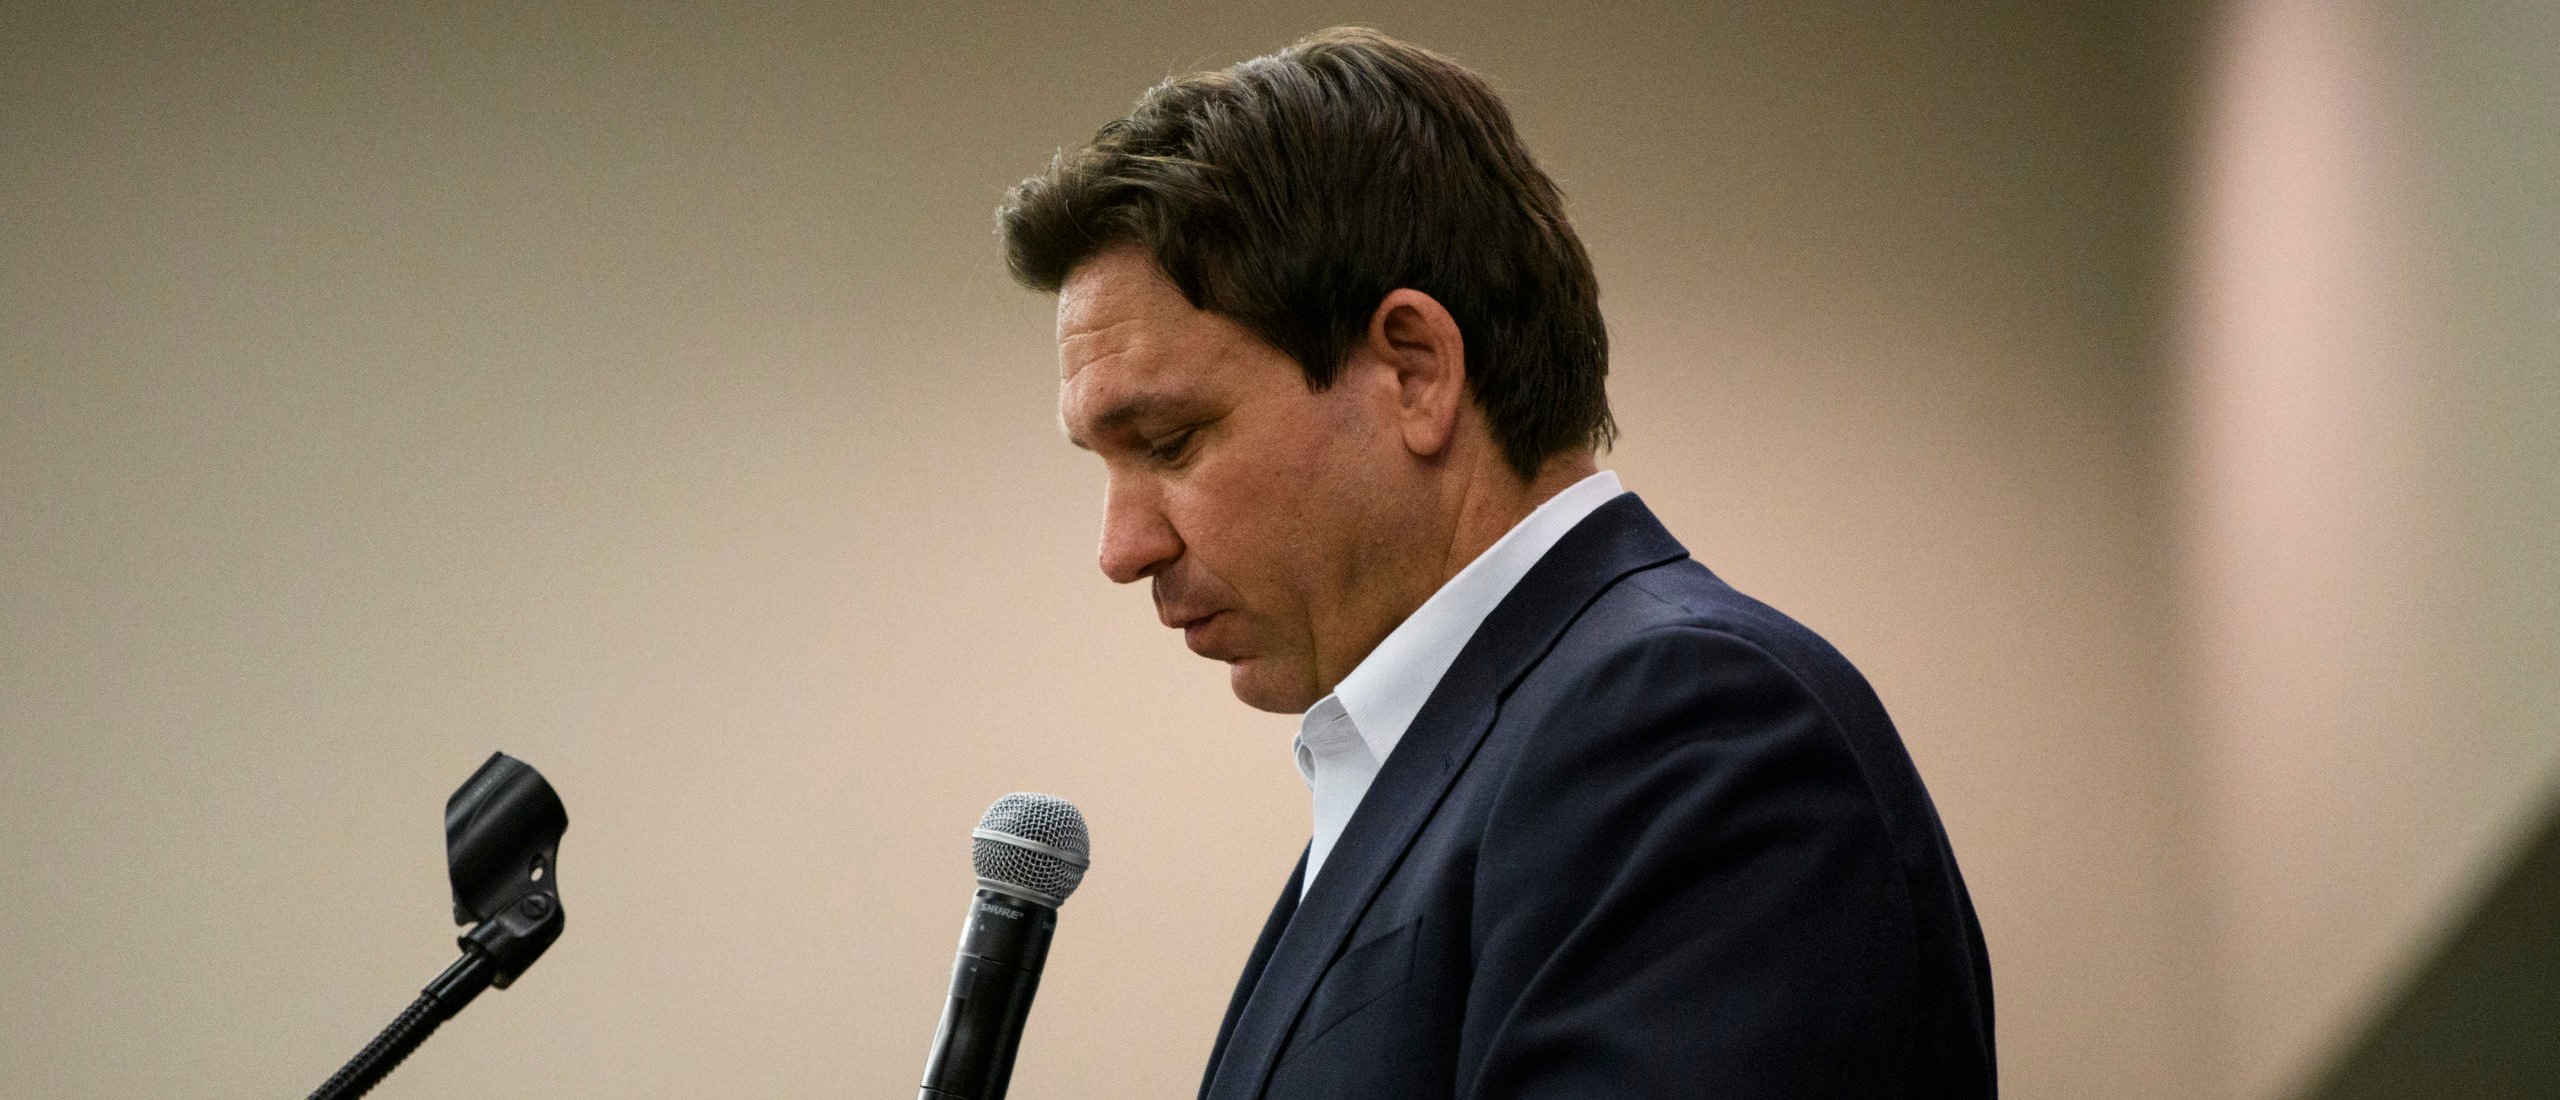 Faculty At Florida Liberal Arts College Votes To Censure DeSantis-Backed Trustees